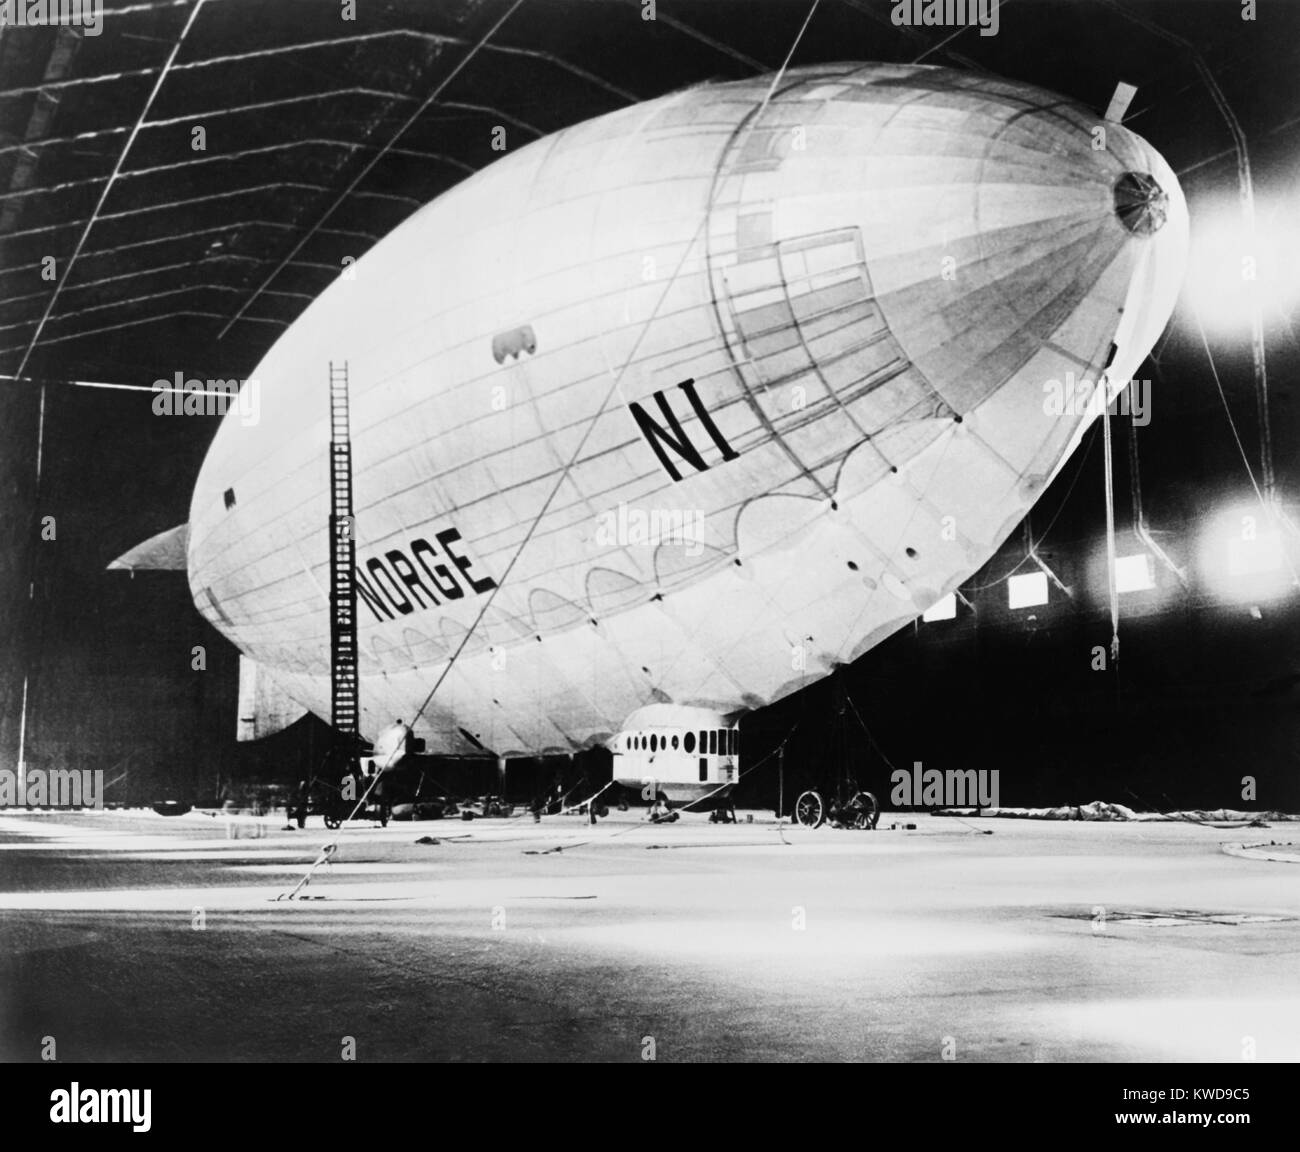 Airship Norge in its hangar before the Amundsen-Ellsworth Transpolar Flight. From Spitzbergen the ship flew over the North Pole on May 12, 1926. It dropped Norwegian, American and Italian flags onto the ice and landed in Alaska two day later (BSLOC 2016 10 134) Stock Photo